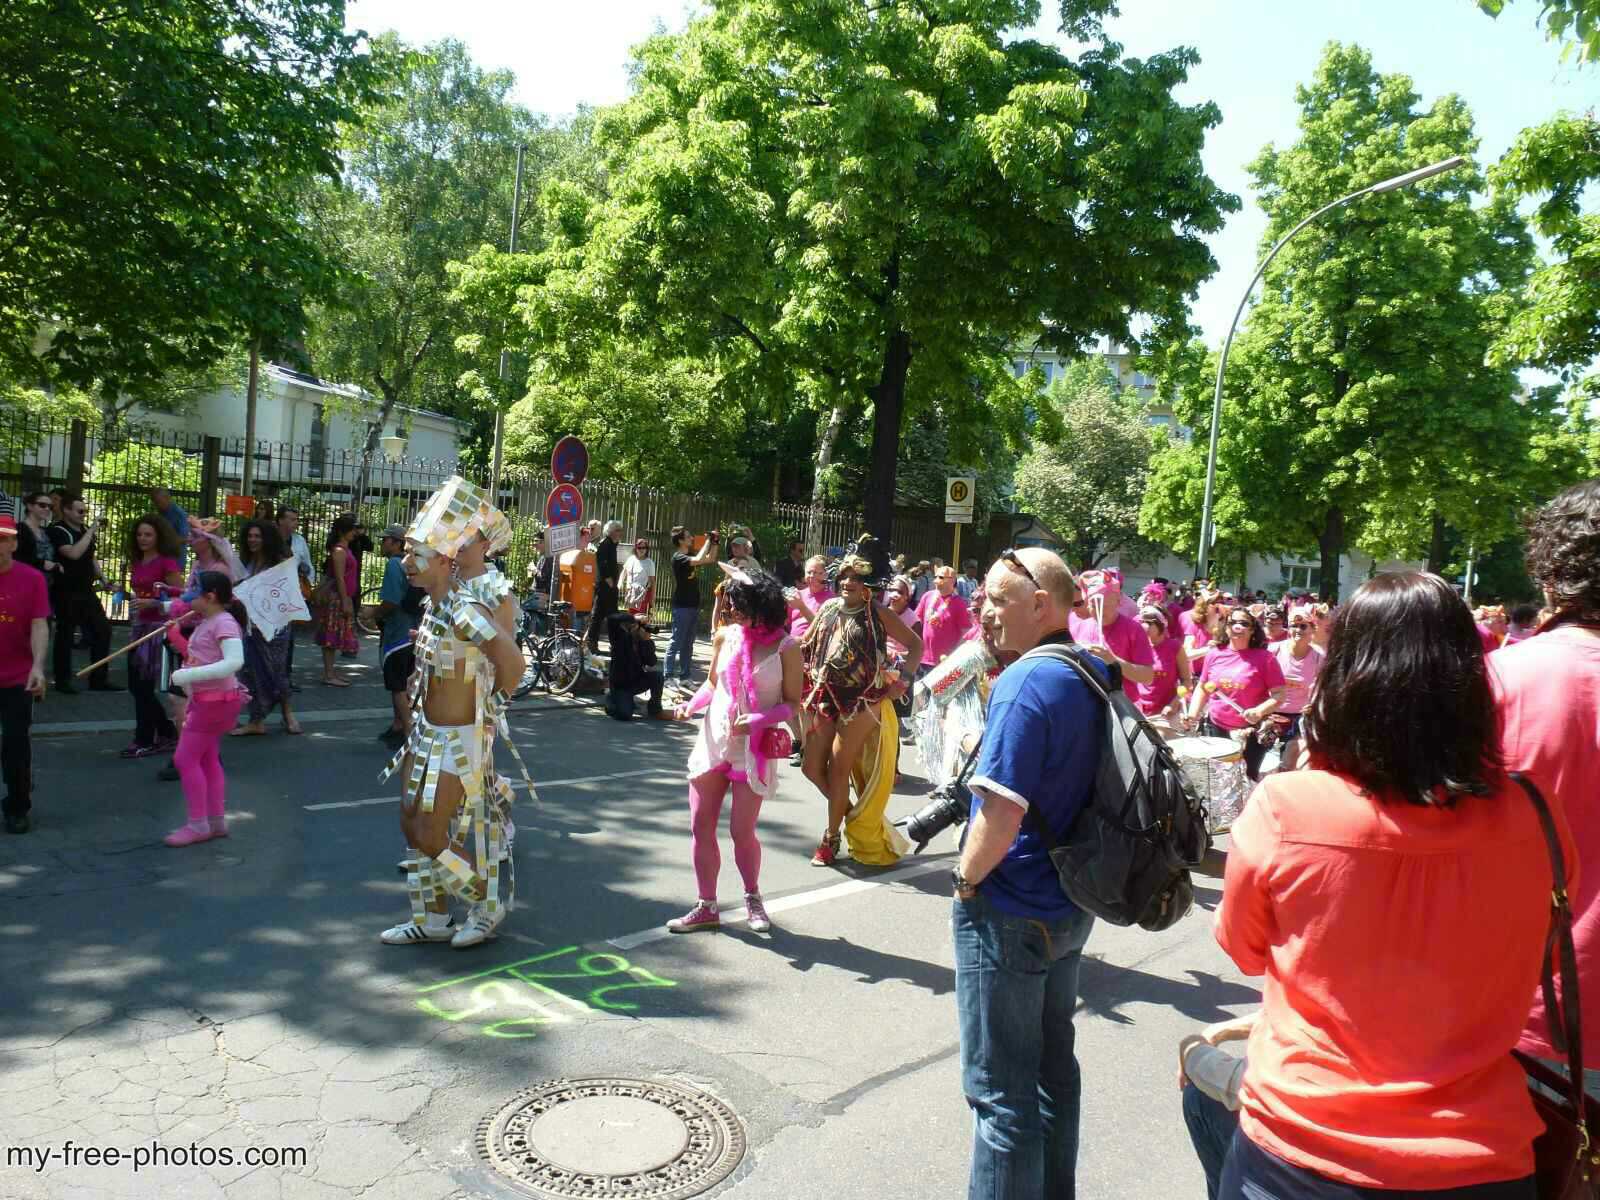 Carnival of cultures